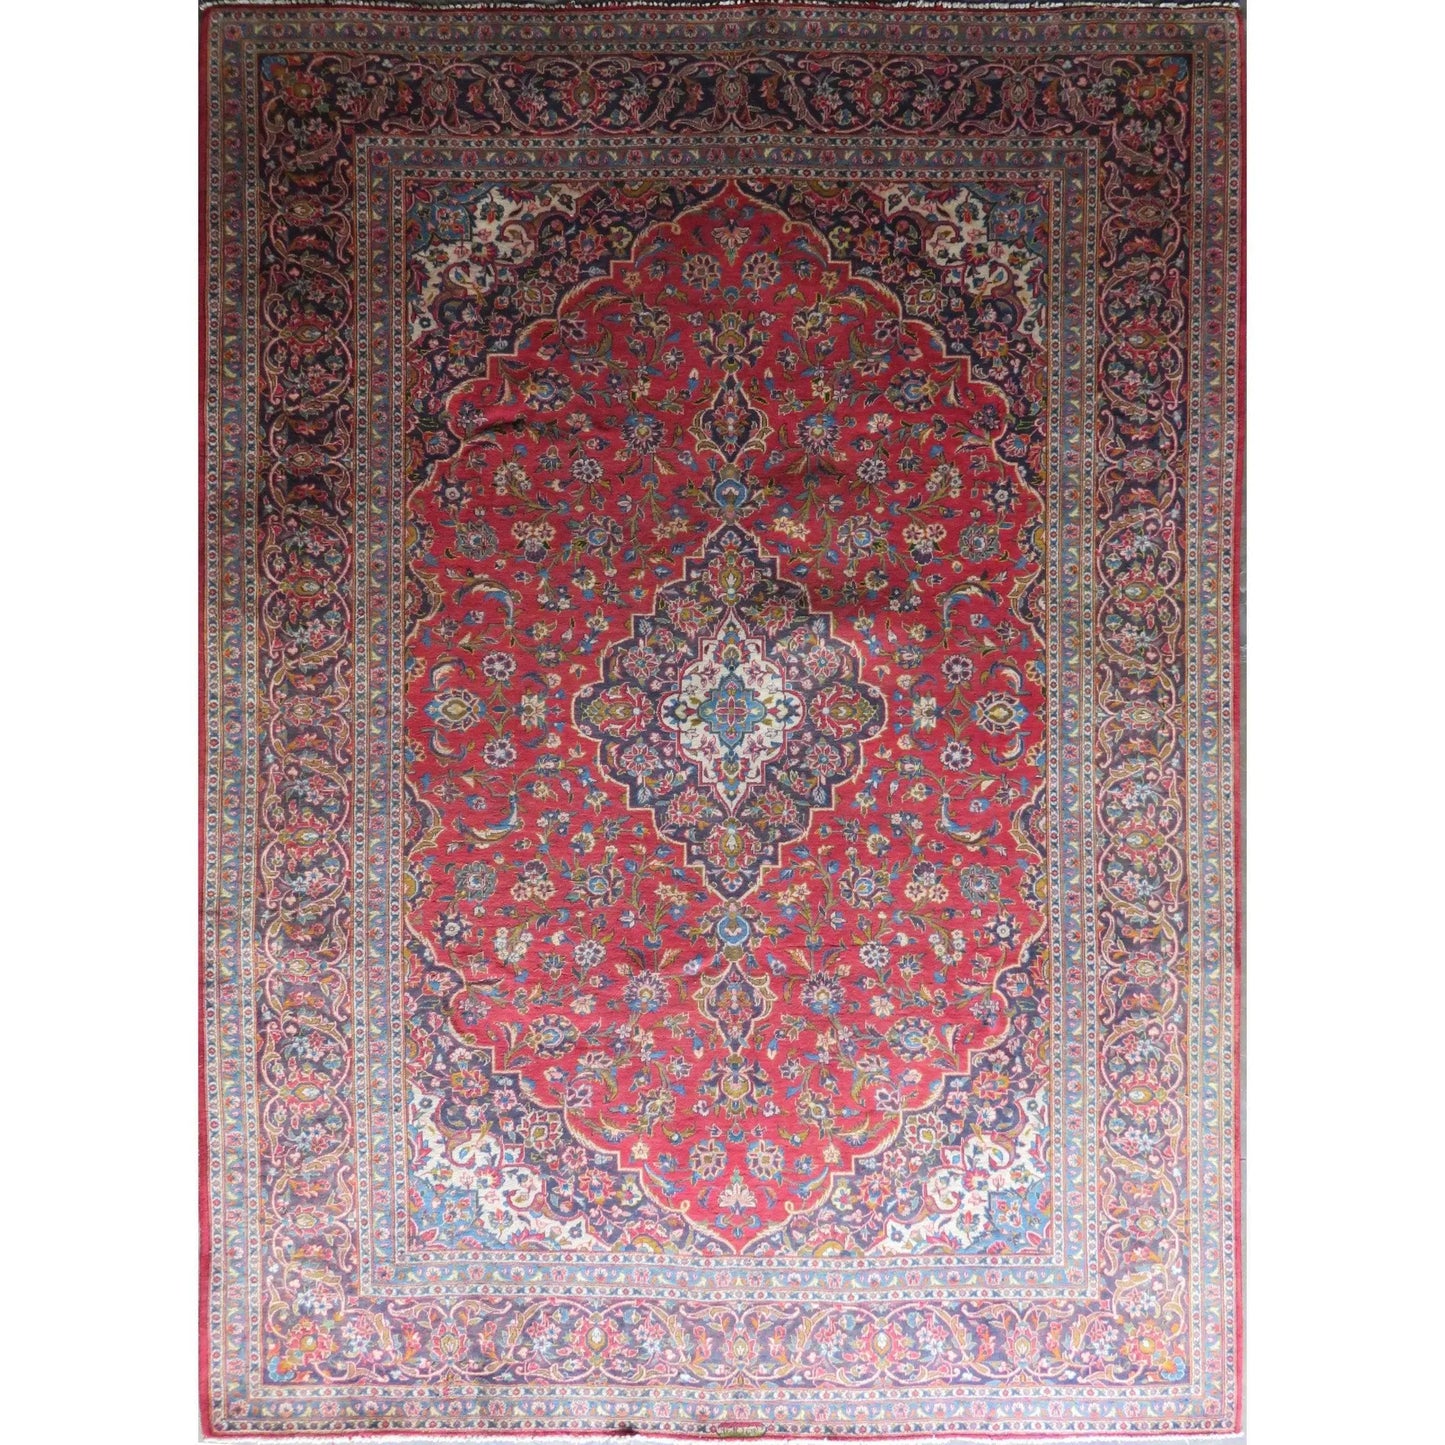 Hand-Knotted Persian Wool Rug _ Luxurious Vintage Design, 12'7" X 8'10", Artisan Crafted